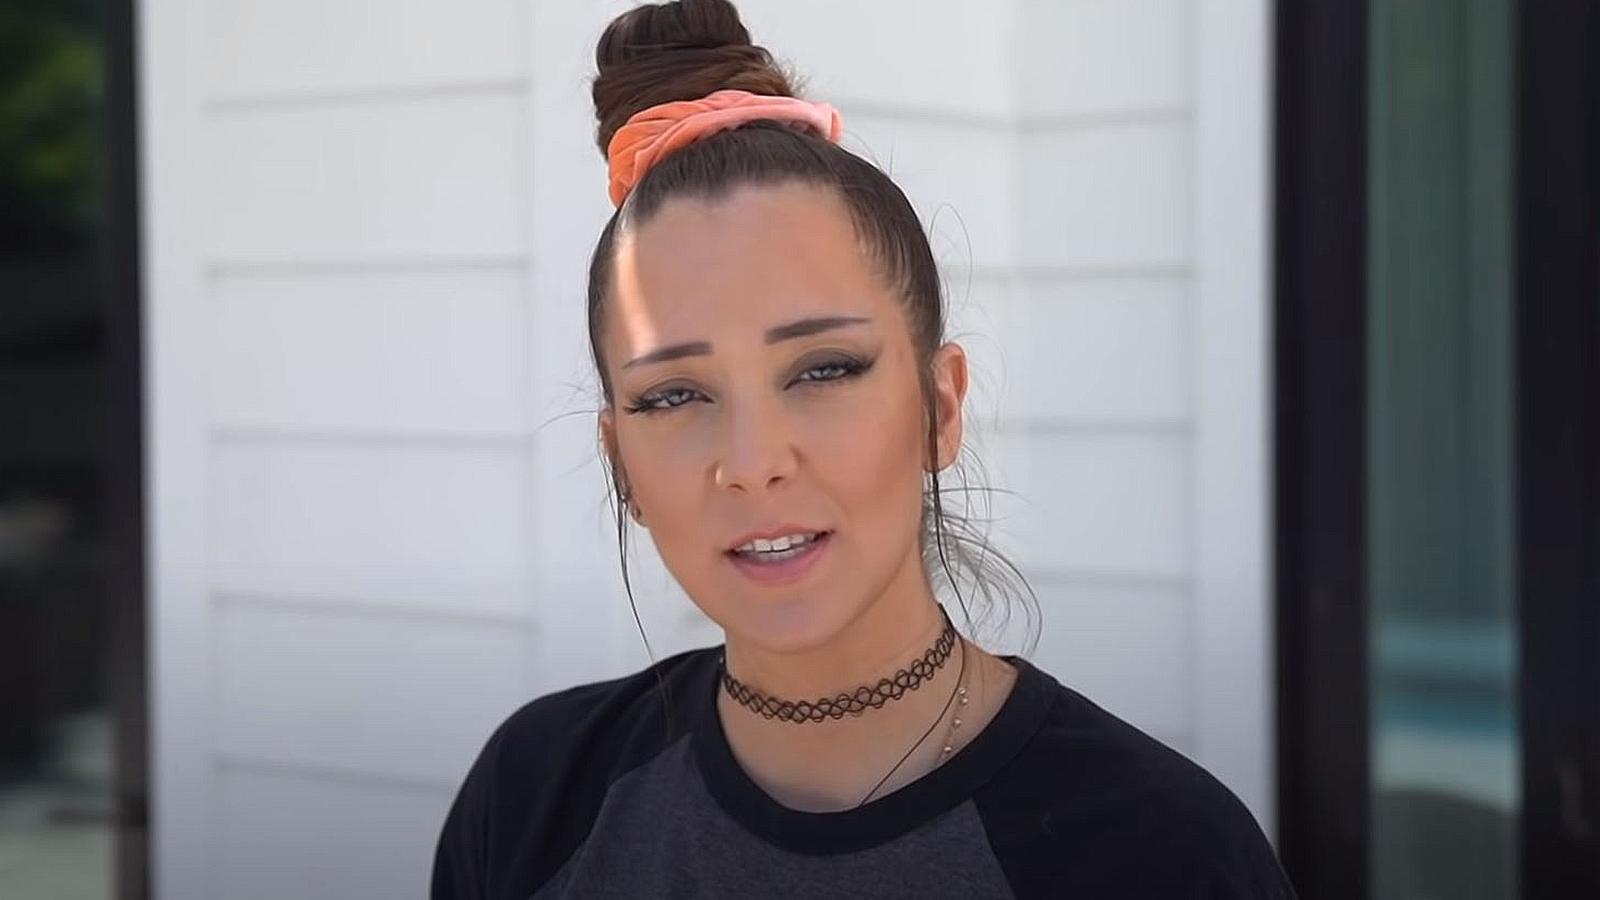 Jenna Marbles talks to the camera for a YouTube video